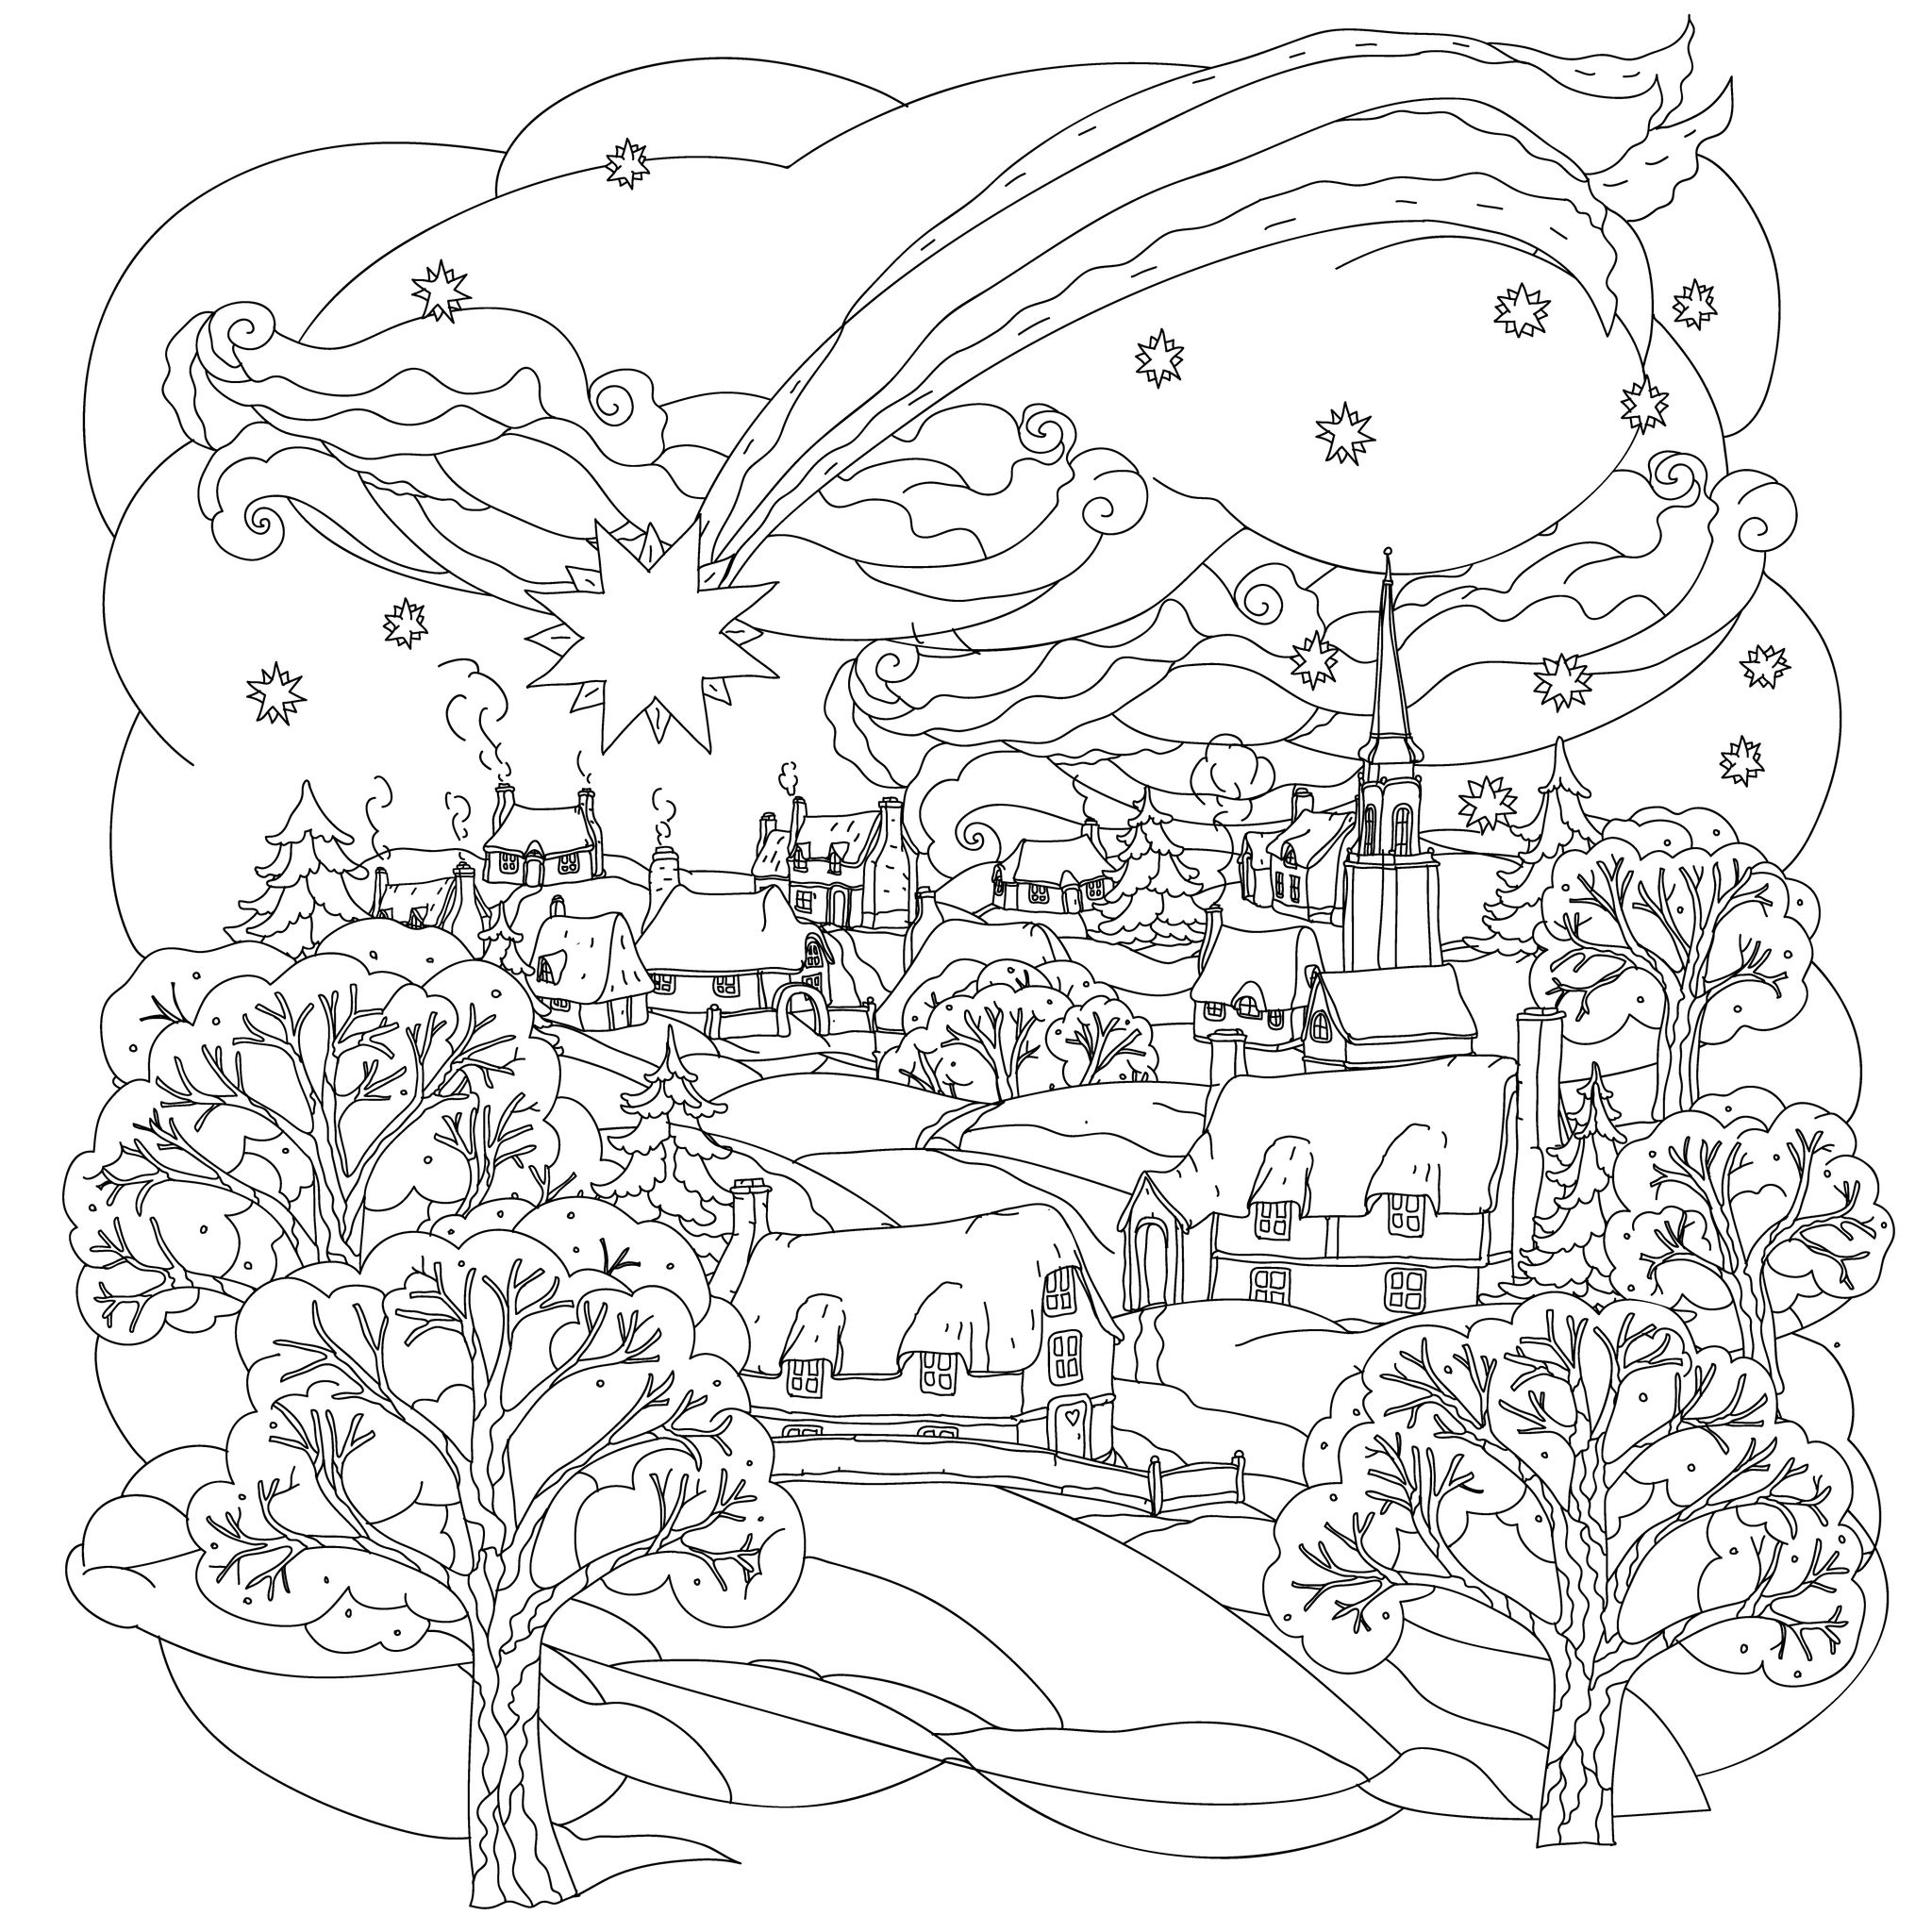 Christmas Coloring Pages For Adults Best Coloring Pages Coloring Wallpapers Download Free Images Wallpaper [coloring436.blogspot.com]